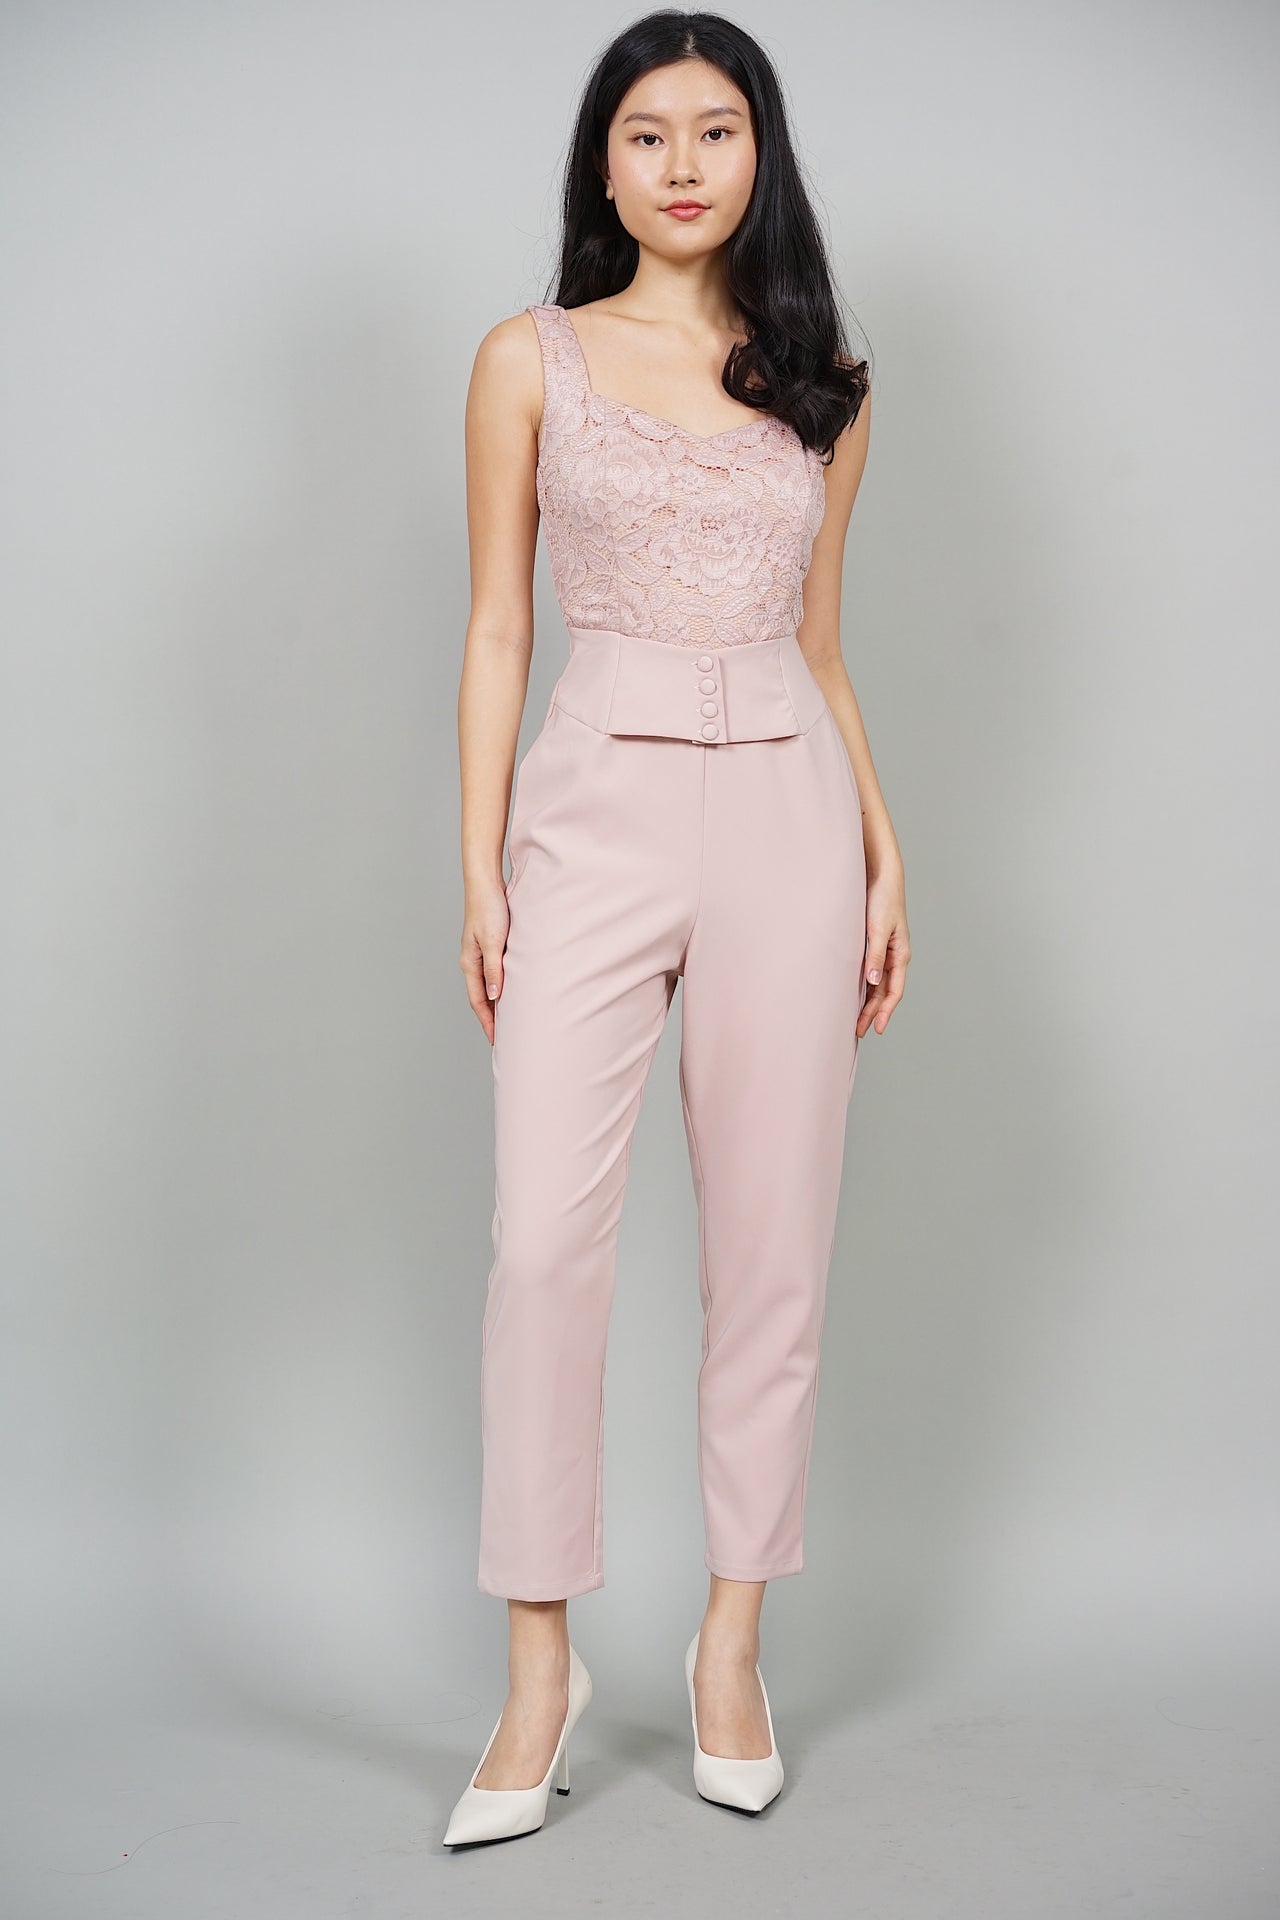 Remi Lace Jumpsuit in Nude Pink